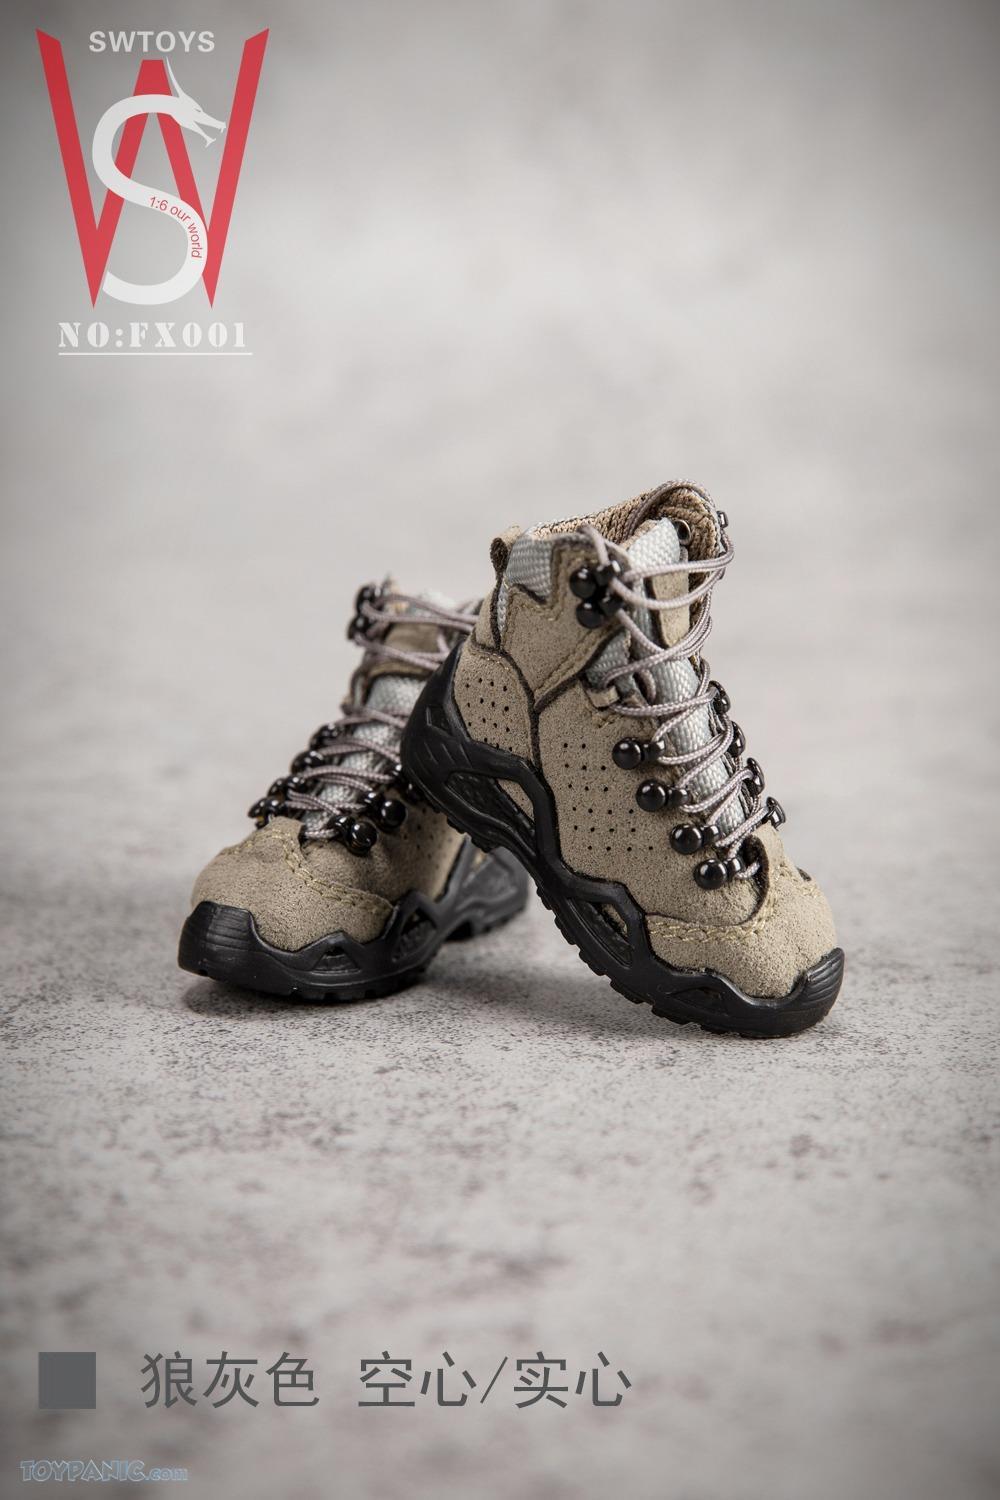 SWToys - NEW PRODUCT: SWToys: Men's Tactical Military Boots (Hollow) (4 colors) 28820210